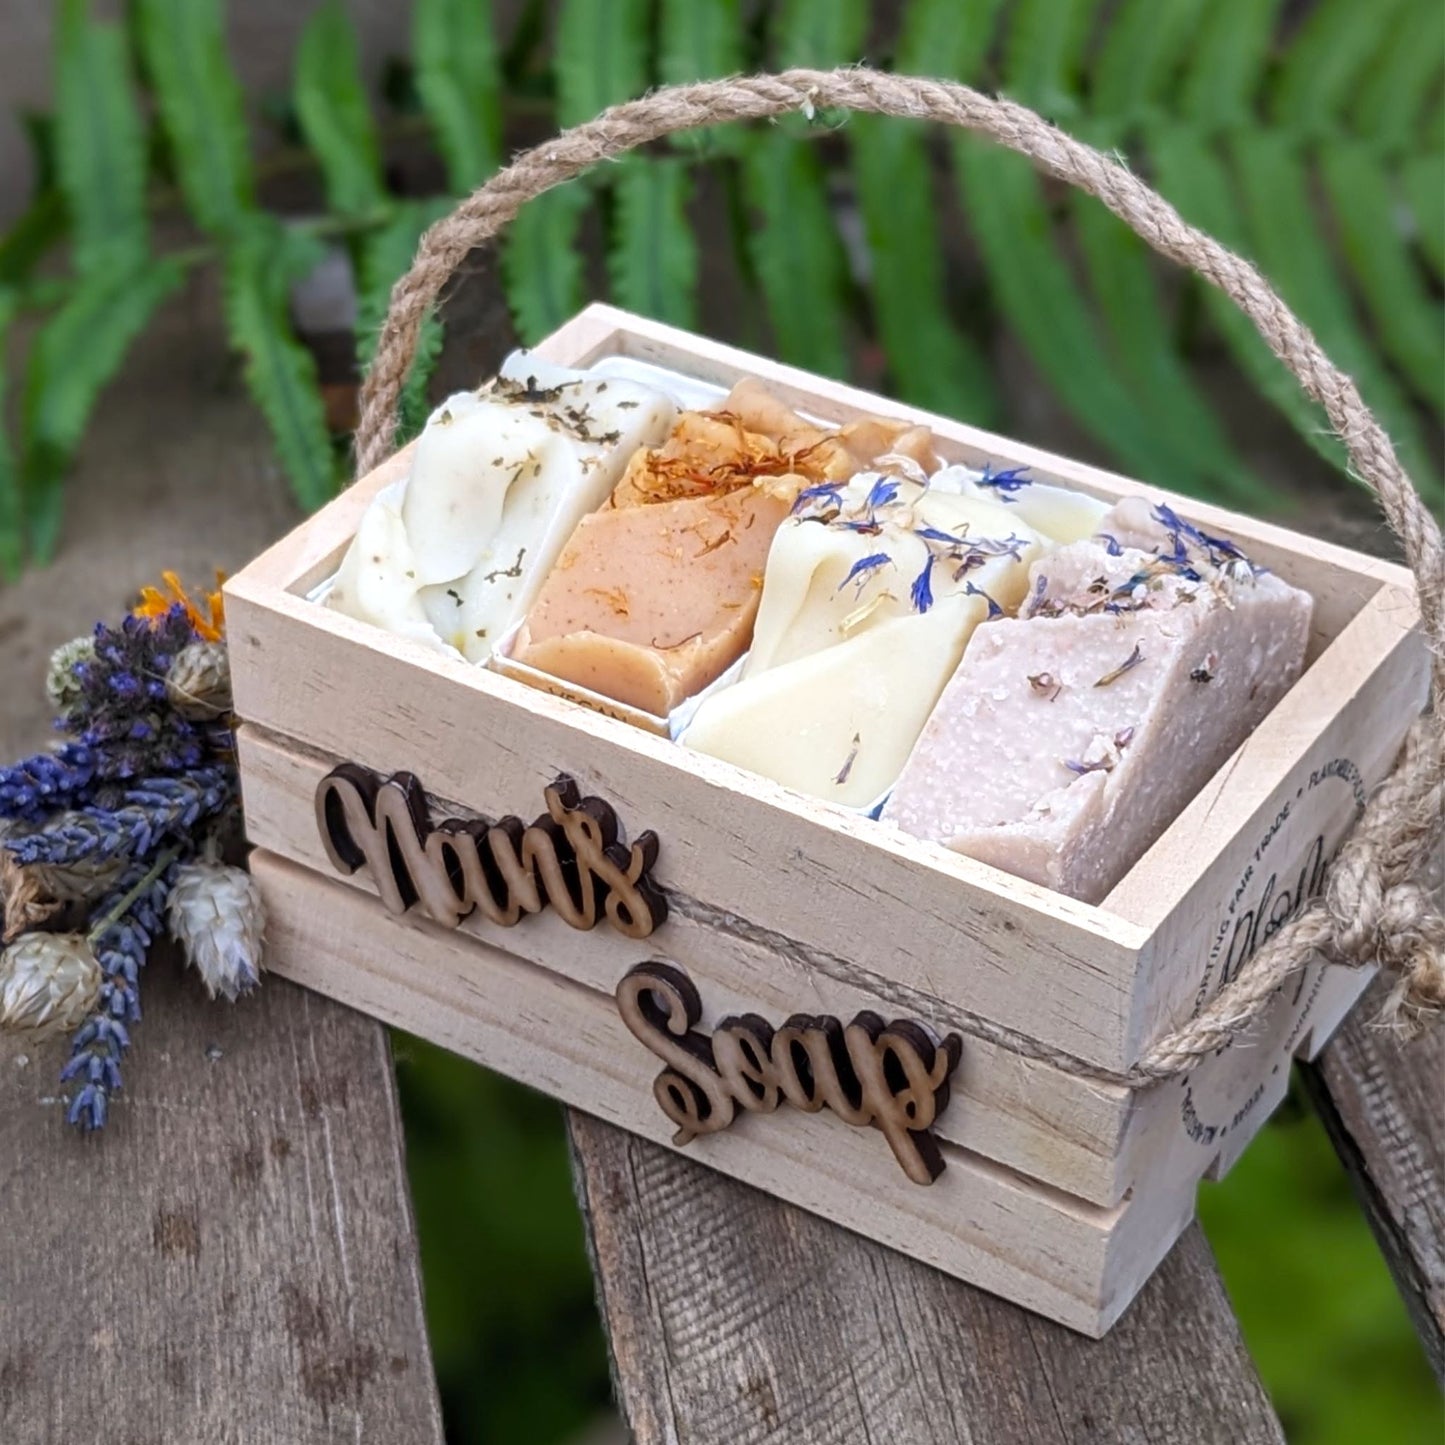 Wooden crate for nan's soap bars